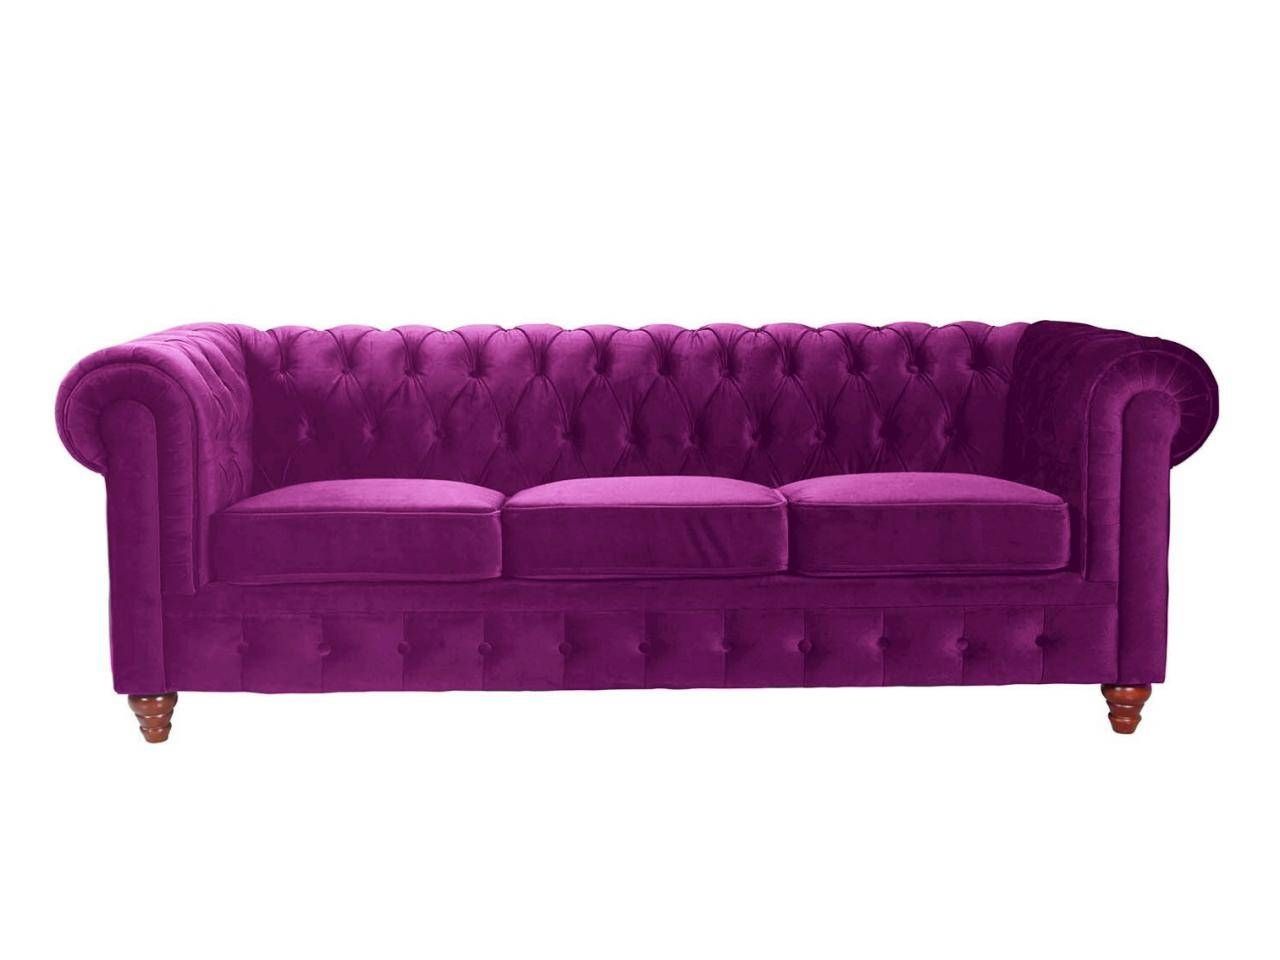 11 Of The Best Velvet Sofas To Decorate With | Hgtv's Decorating For Sofa Trend (View 15 of 25)